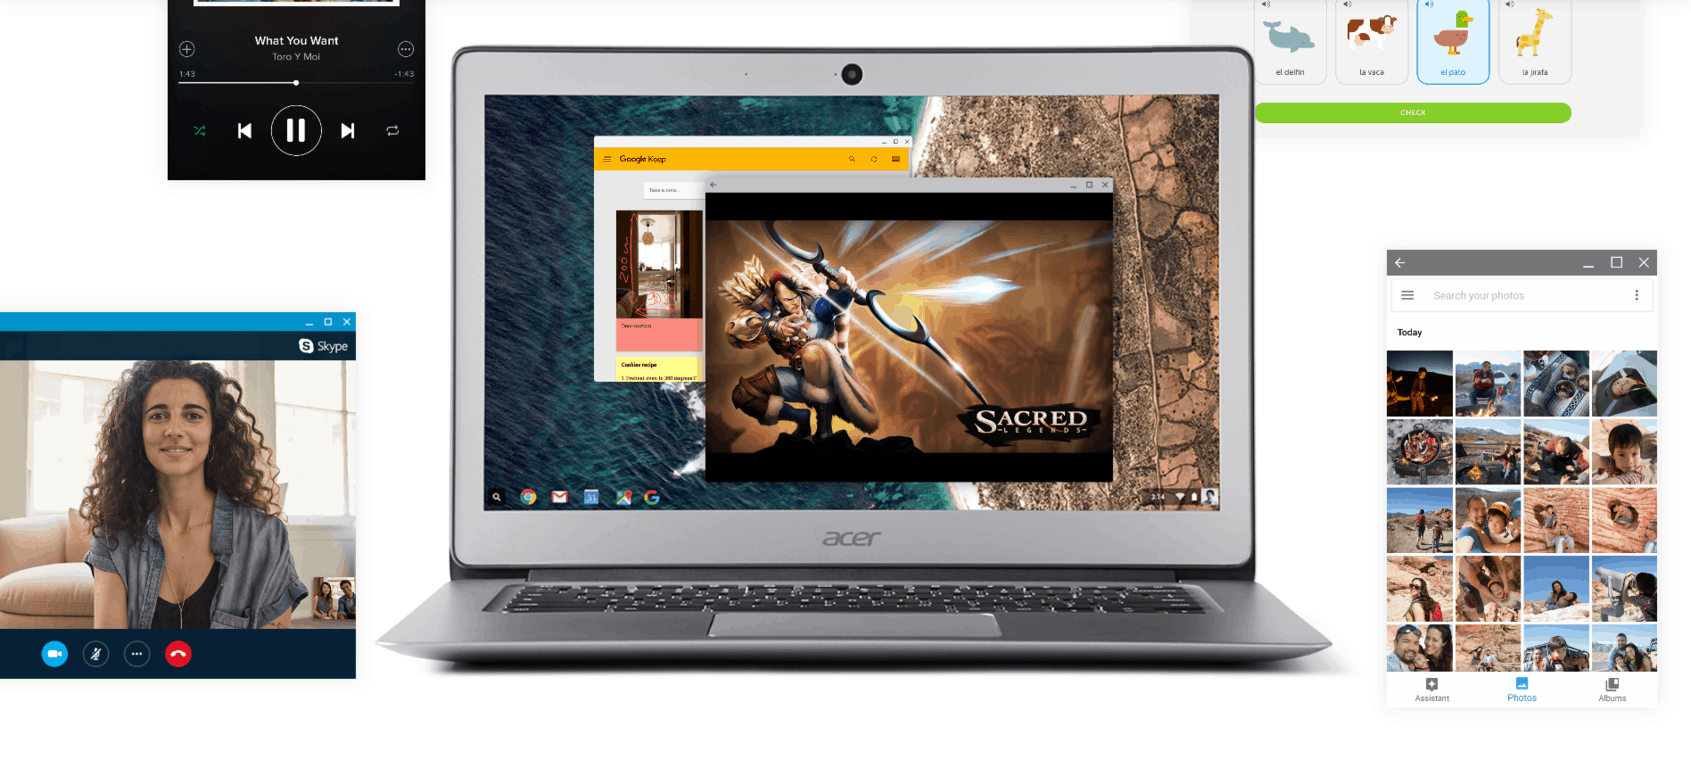 Google's rumored "Campfire" alt-OS mode could bring Windows 10 to Chromebooks - OnMSFT.com - August 13, 2018